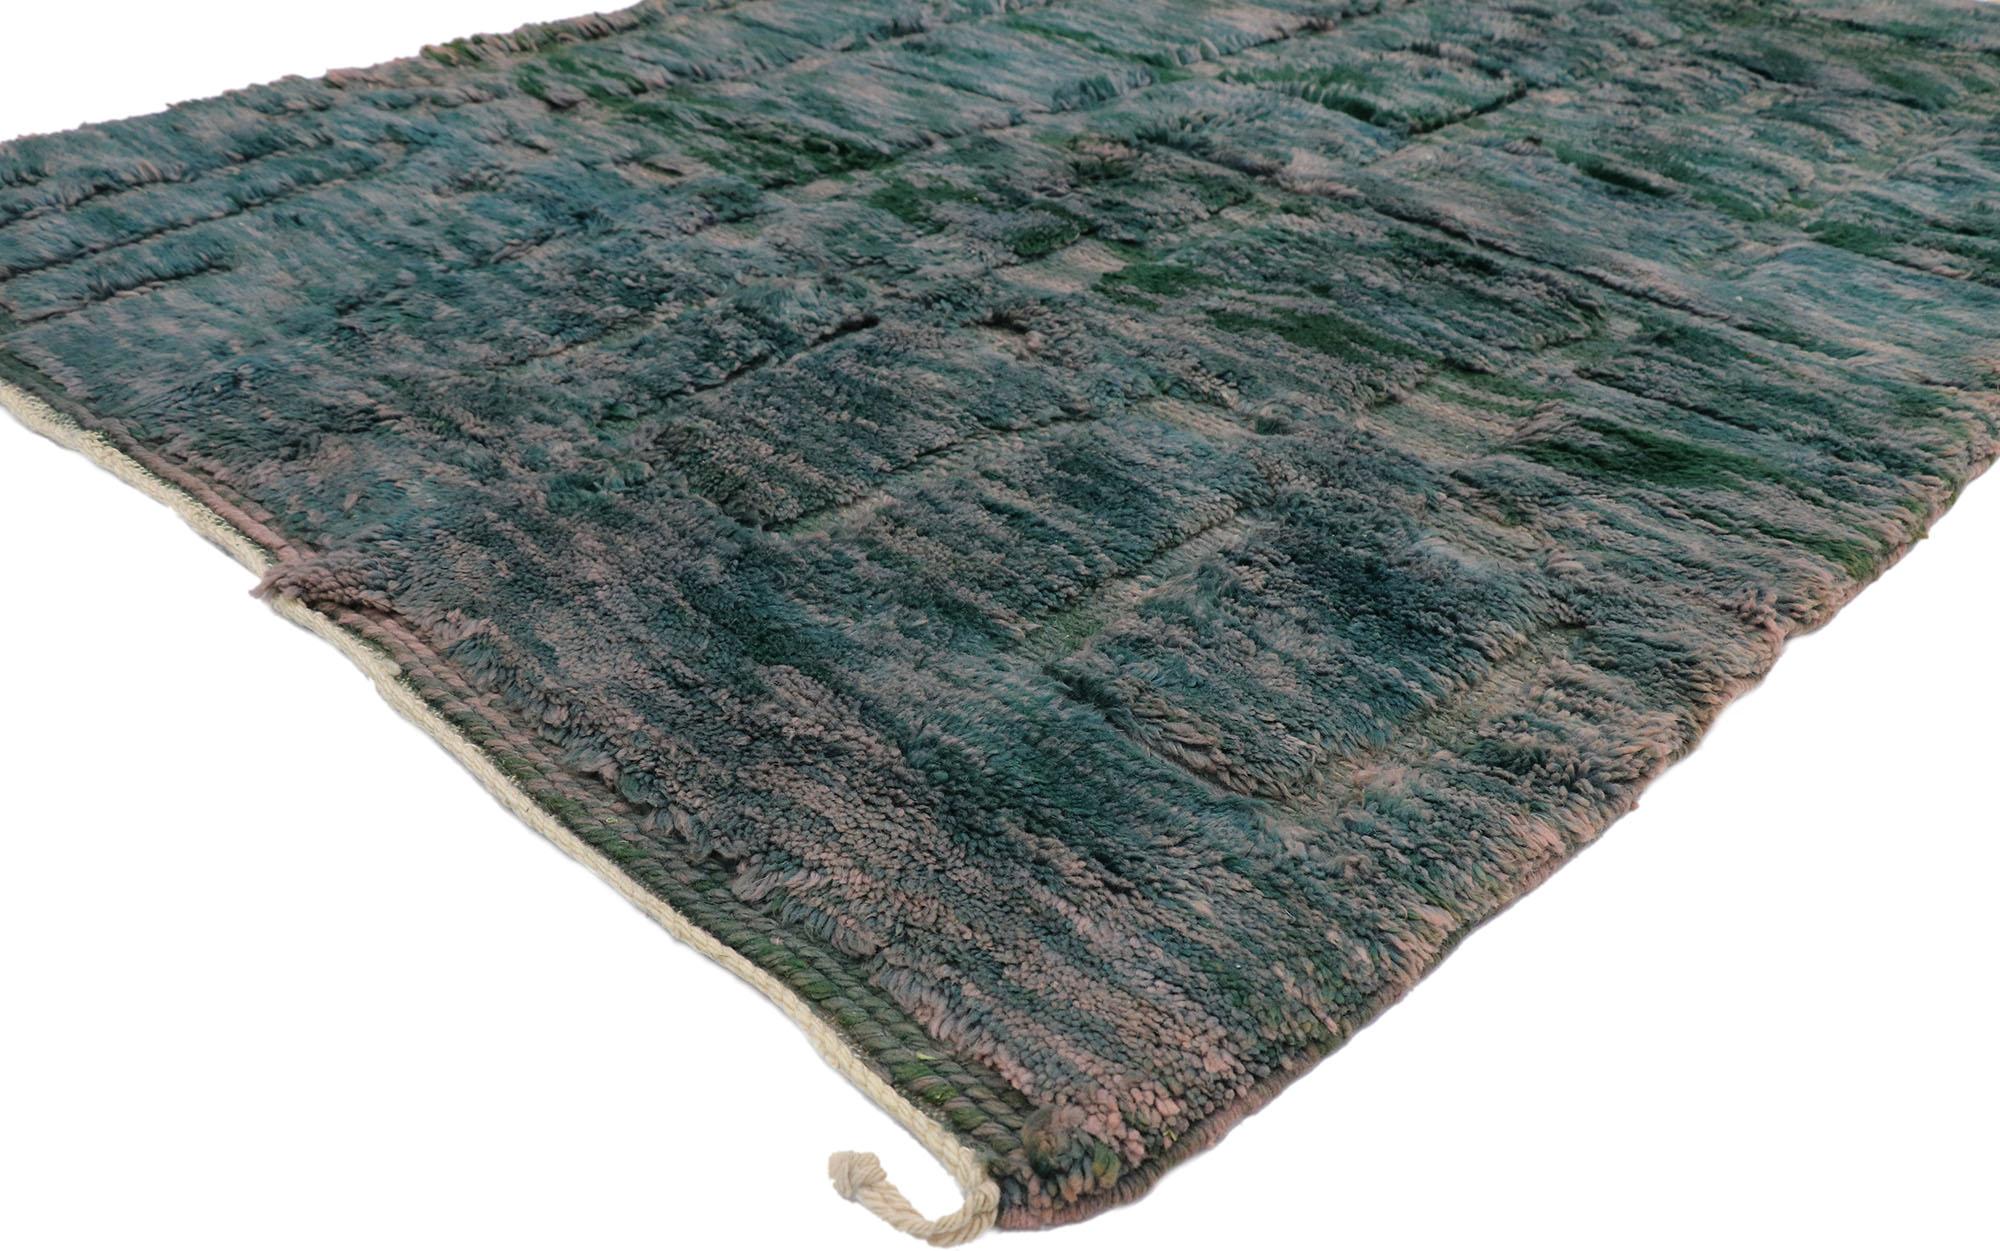 21130 Earthy Abstract Moroccan Rug, 05'07 x 07'09.
Emulating nomadic charm and Abstract Expressionism, this hand knotted wool Berber Moroccan rug is a captivating vision of woven beauty. The visual complexity and earthy colors woven into this piece